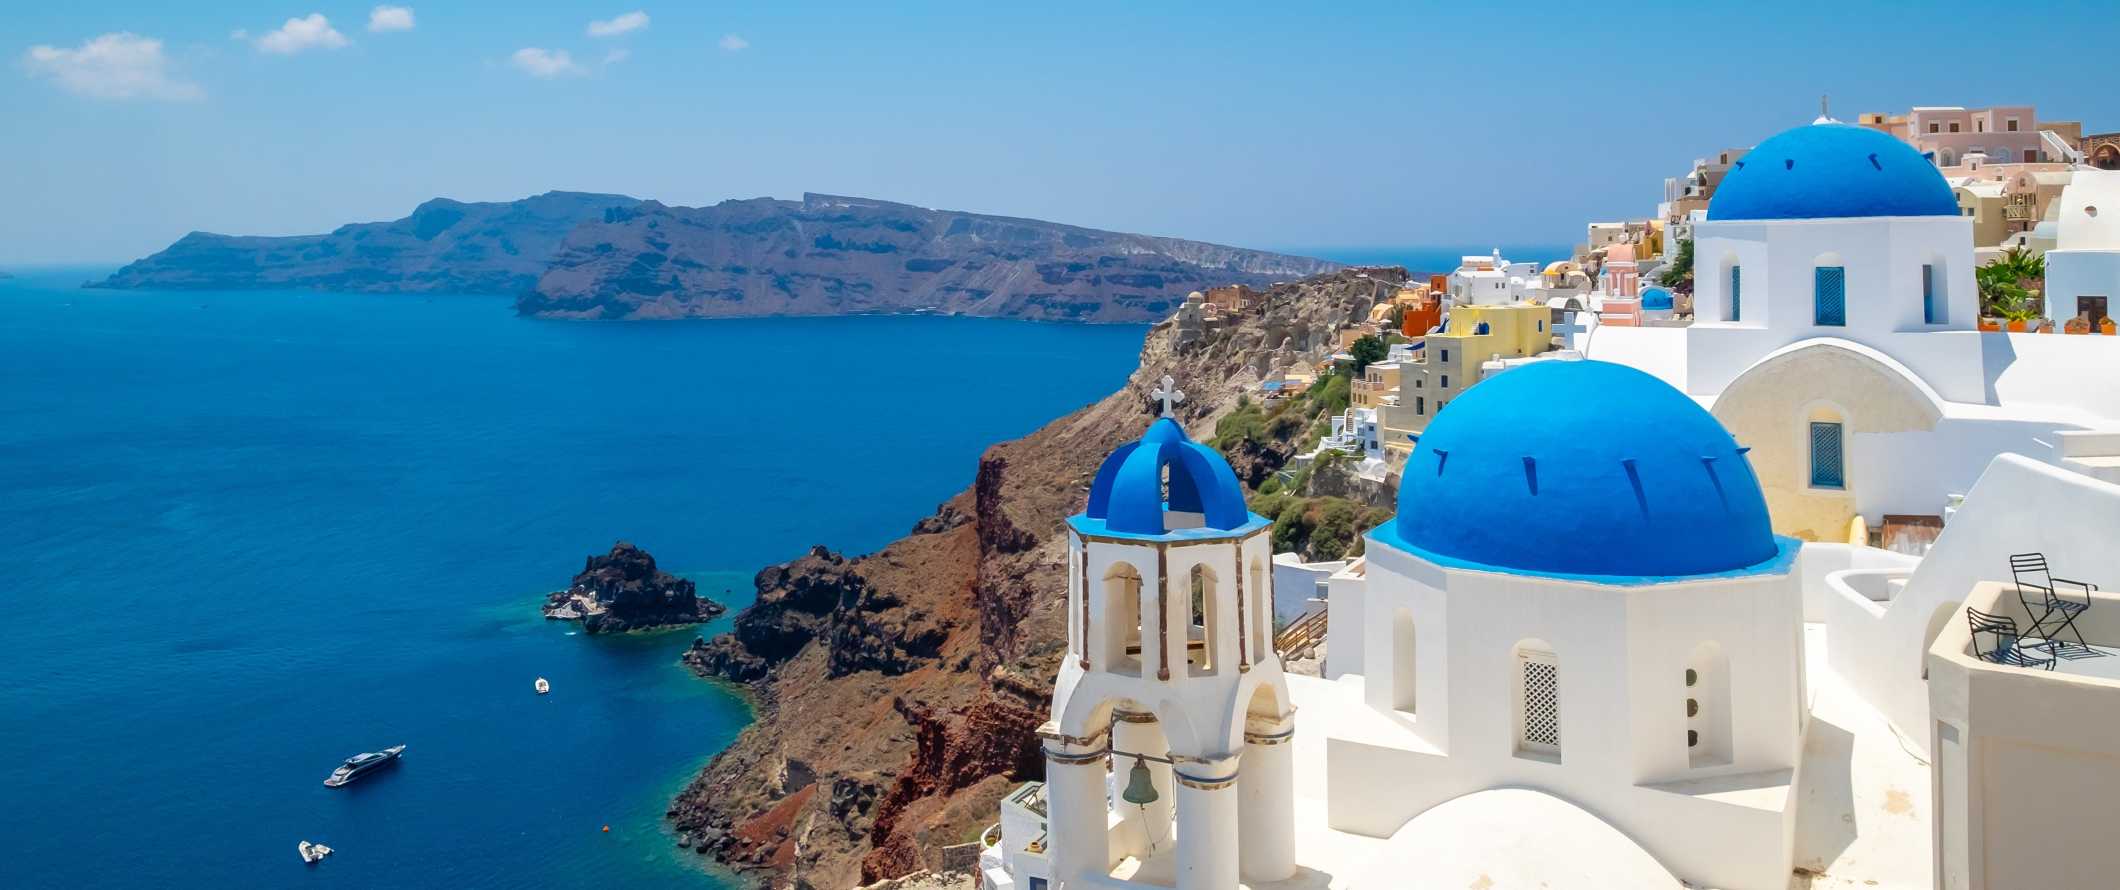 White-washed buildings with blue domed roofs overlooking the Mediterranean in Santorini, Greece